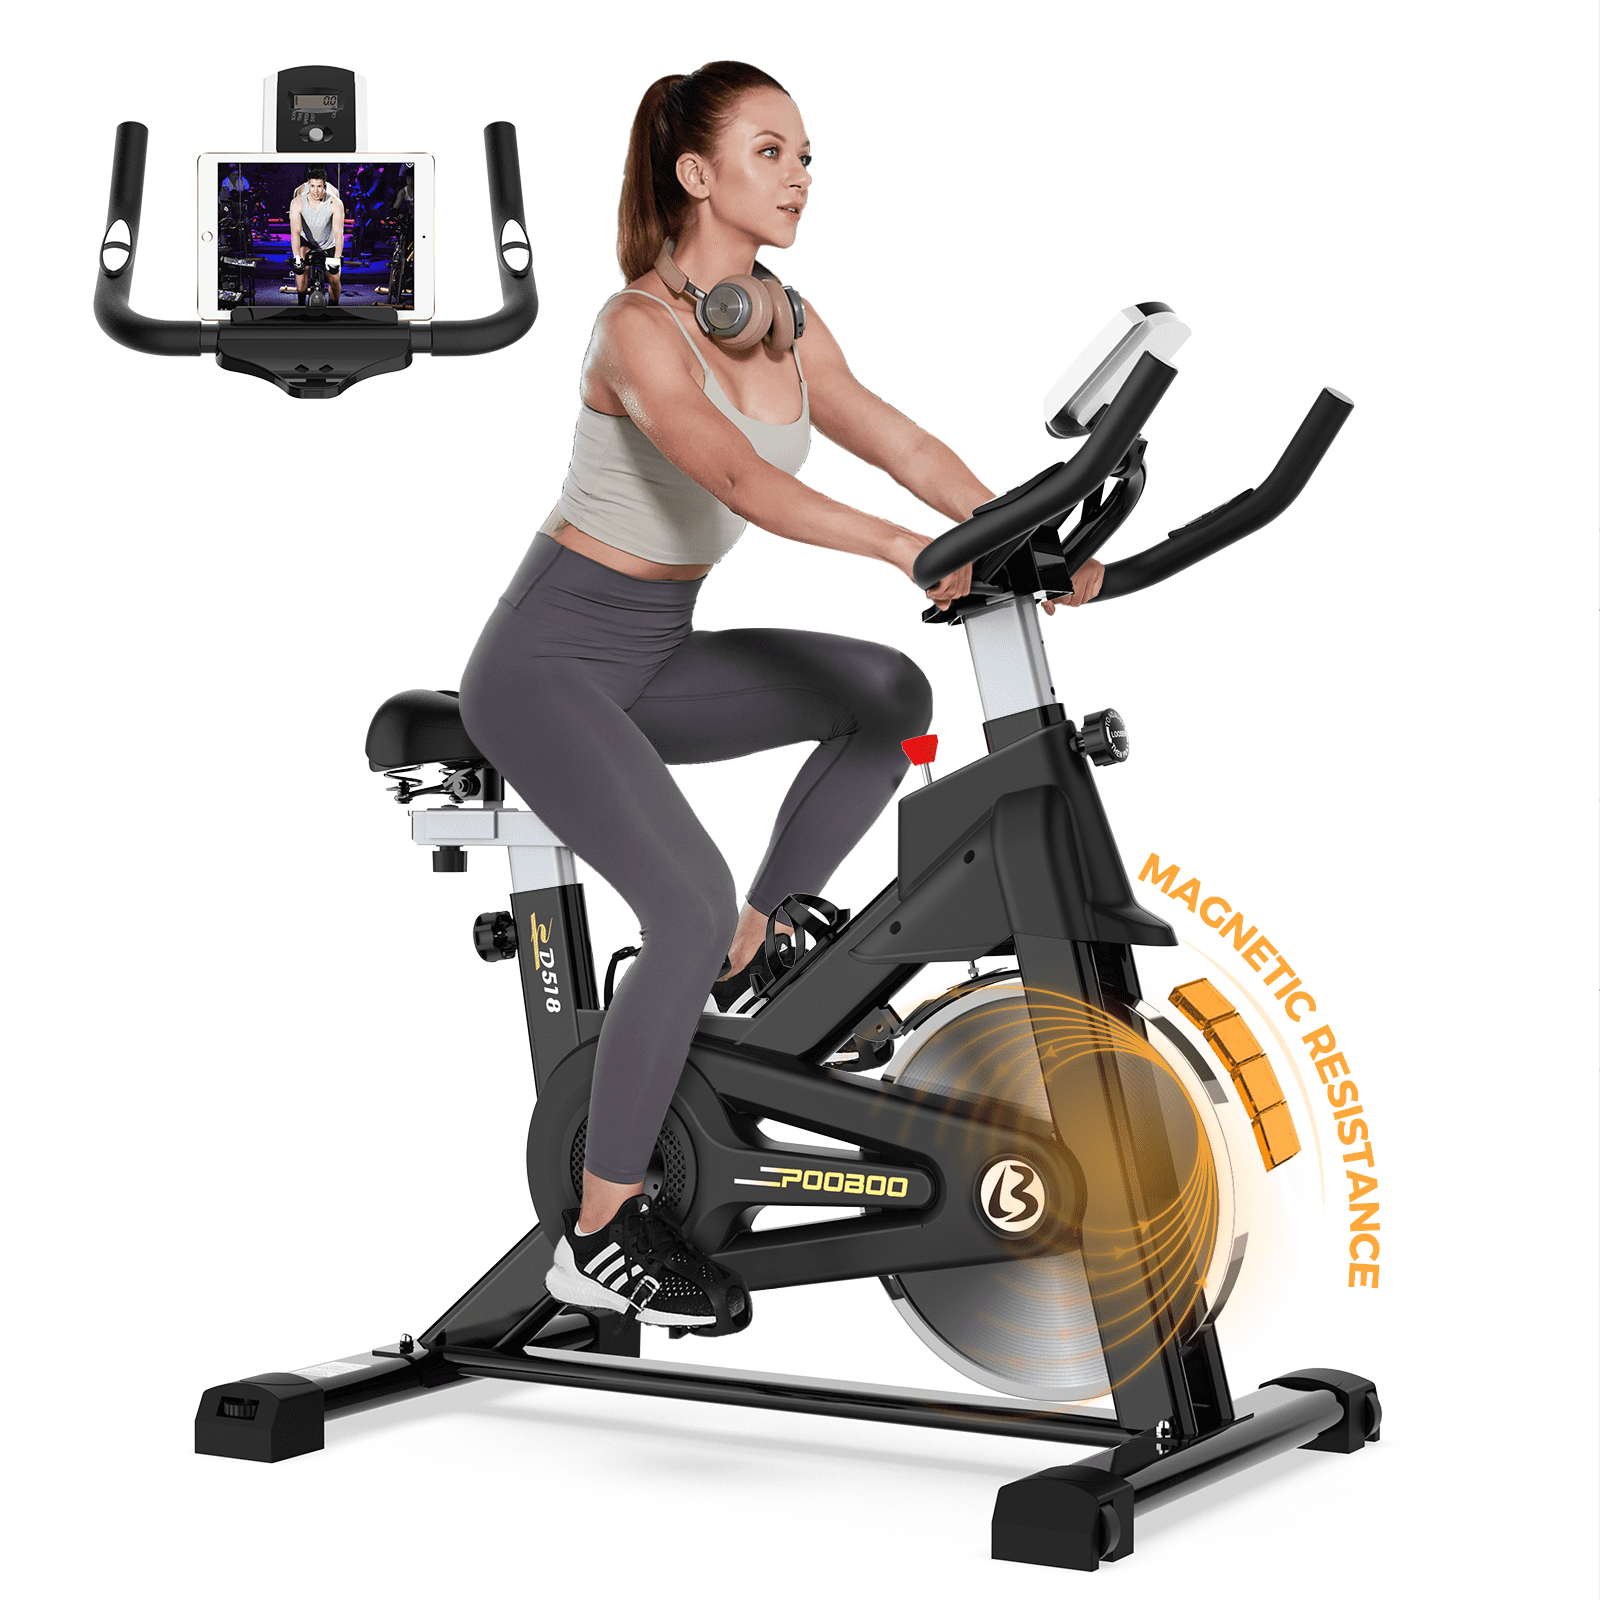 Pooboo Indoor Magnetic Cycling Bike Stationary Exercise Bike Home Cardio Workout 